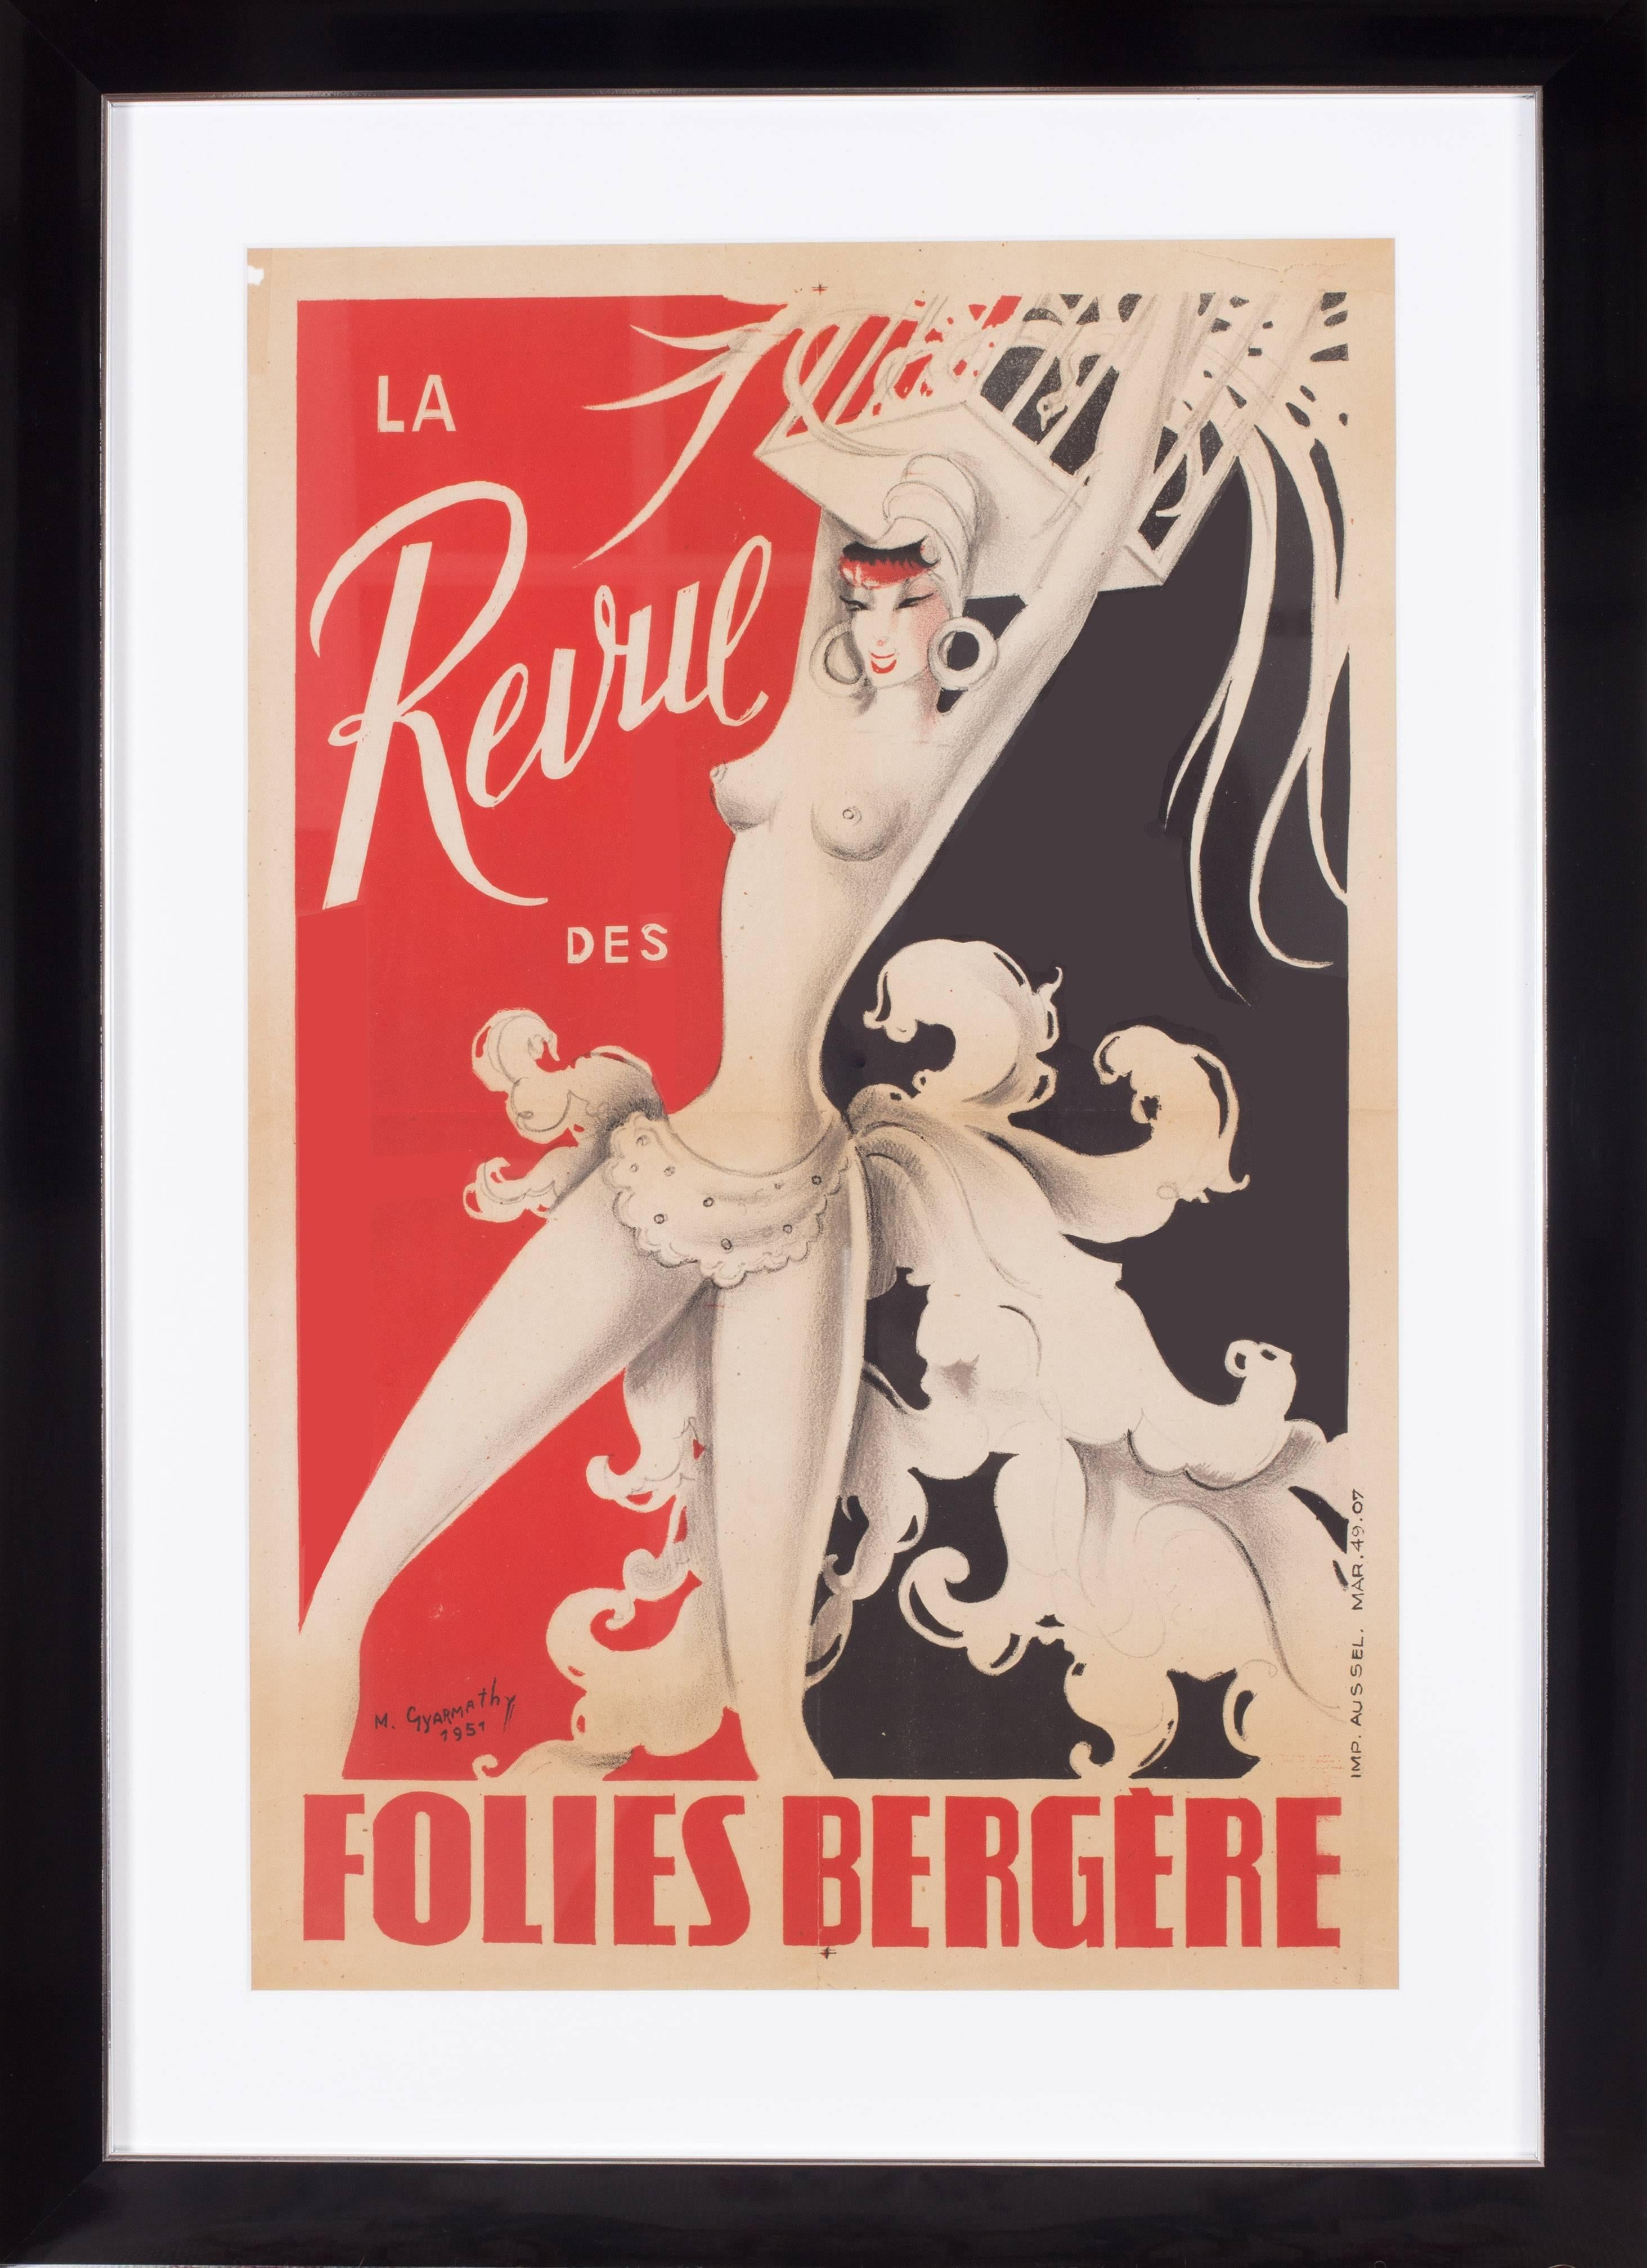 Unknown Figurative Print - La Revue des Folies Bergere, signed by M. Gyarmathy (Miss Bluebell), 1951